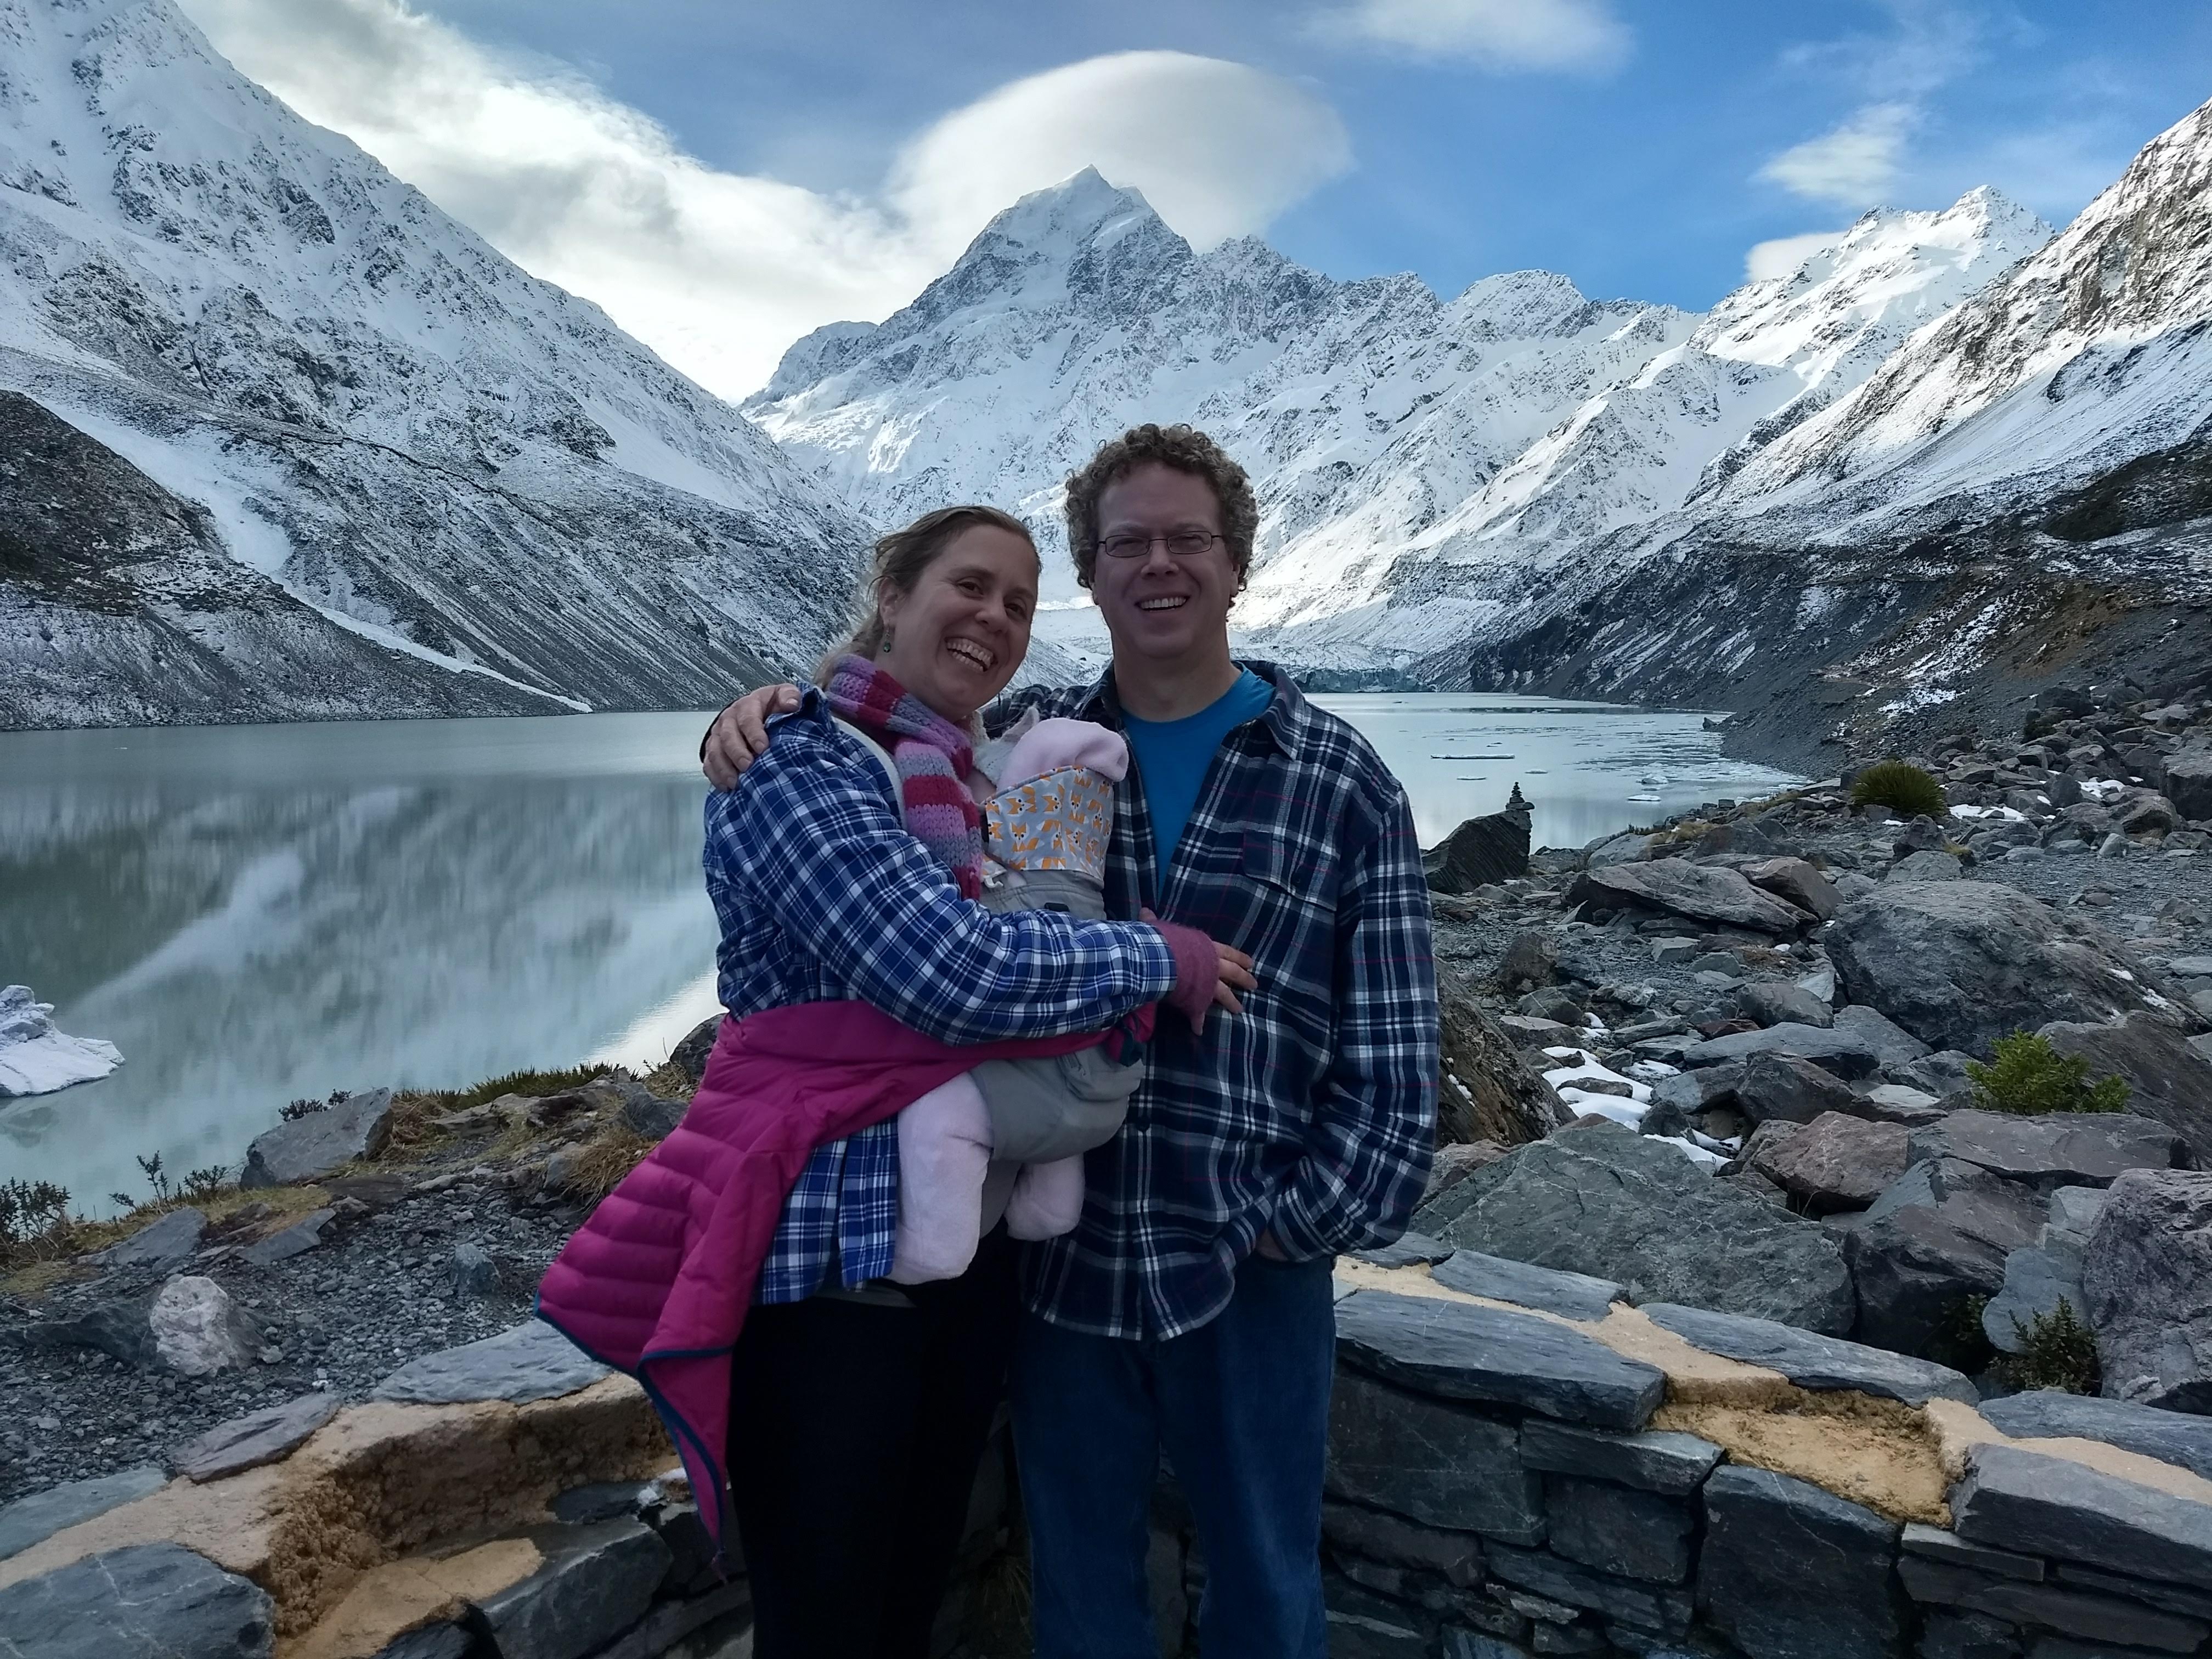 Jill, Cliff & Poppy at Mt. Cook. Photo by Jill Chafin.